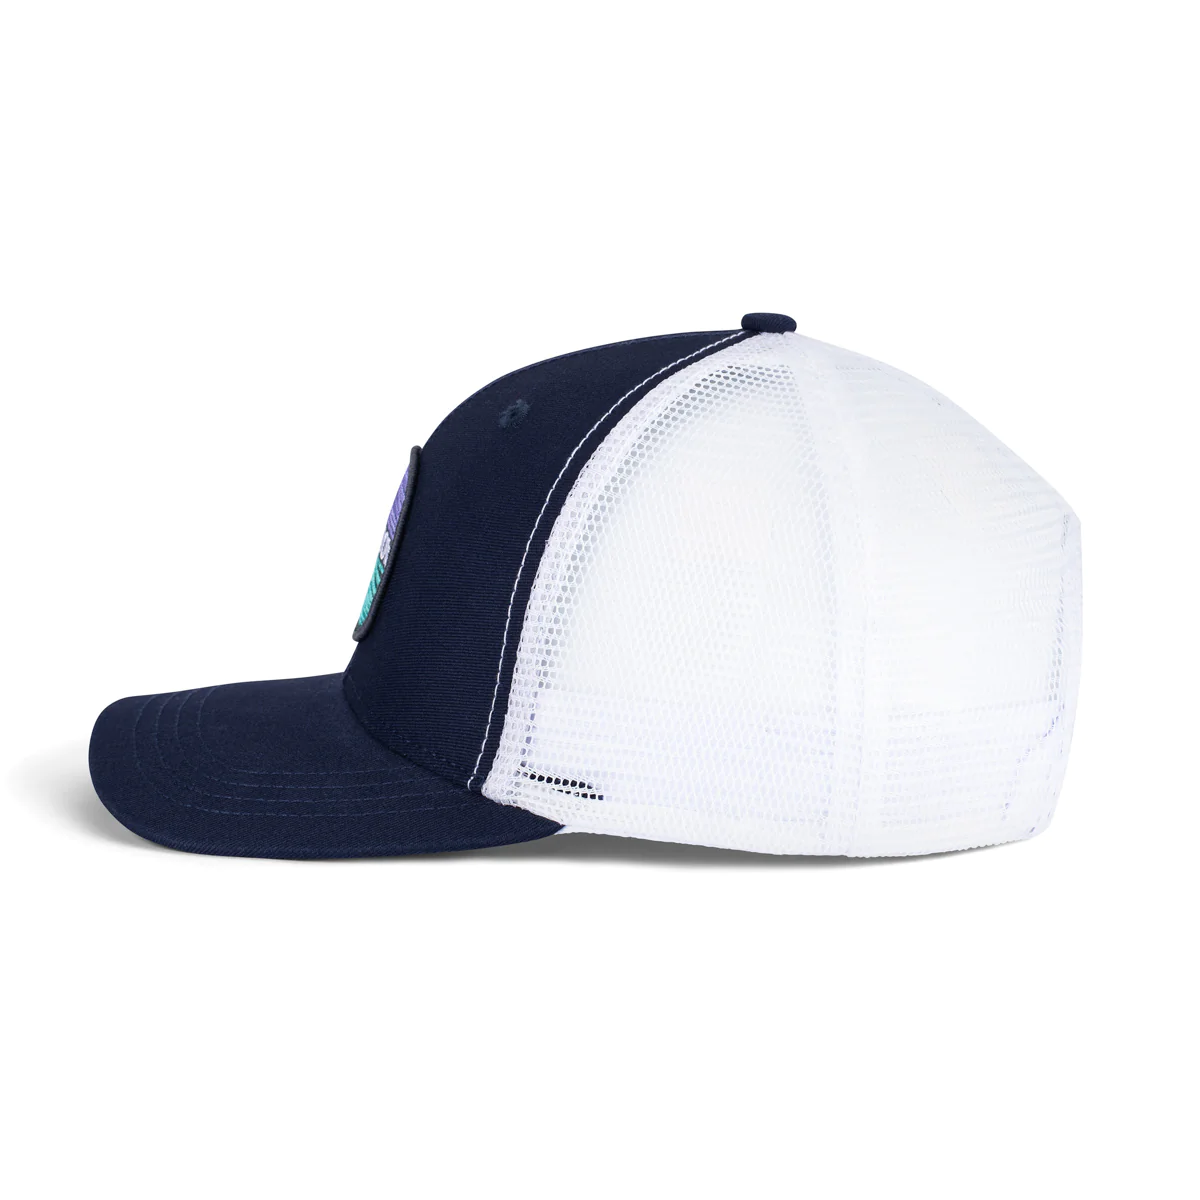 Old Row Waves Mesh Hat Navy